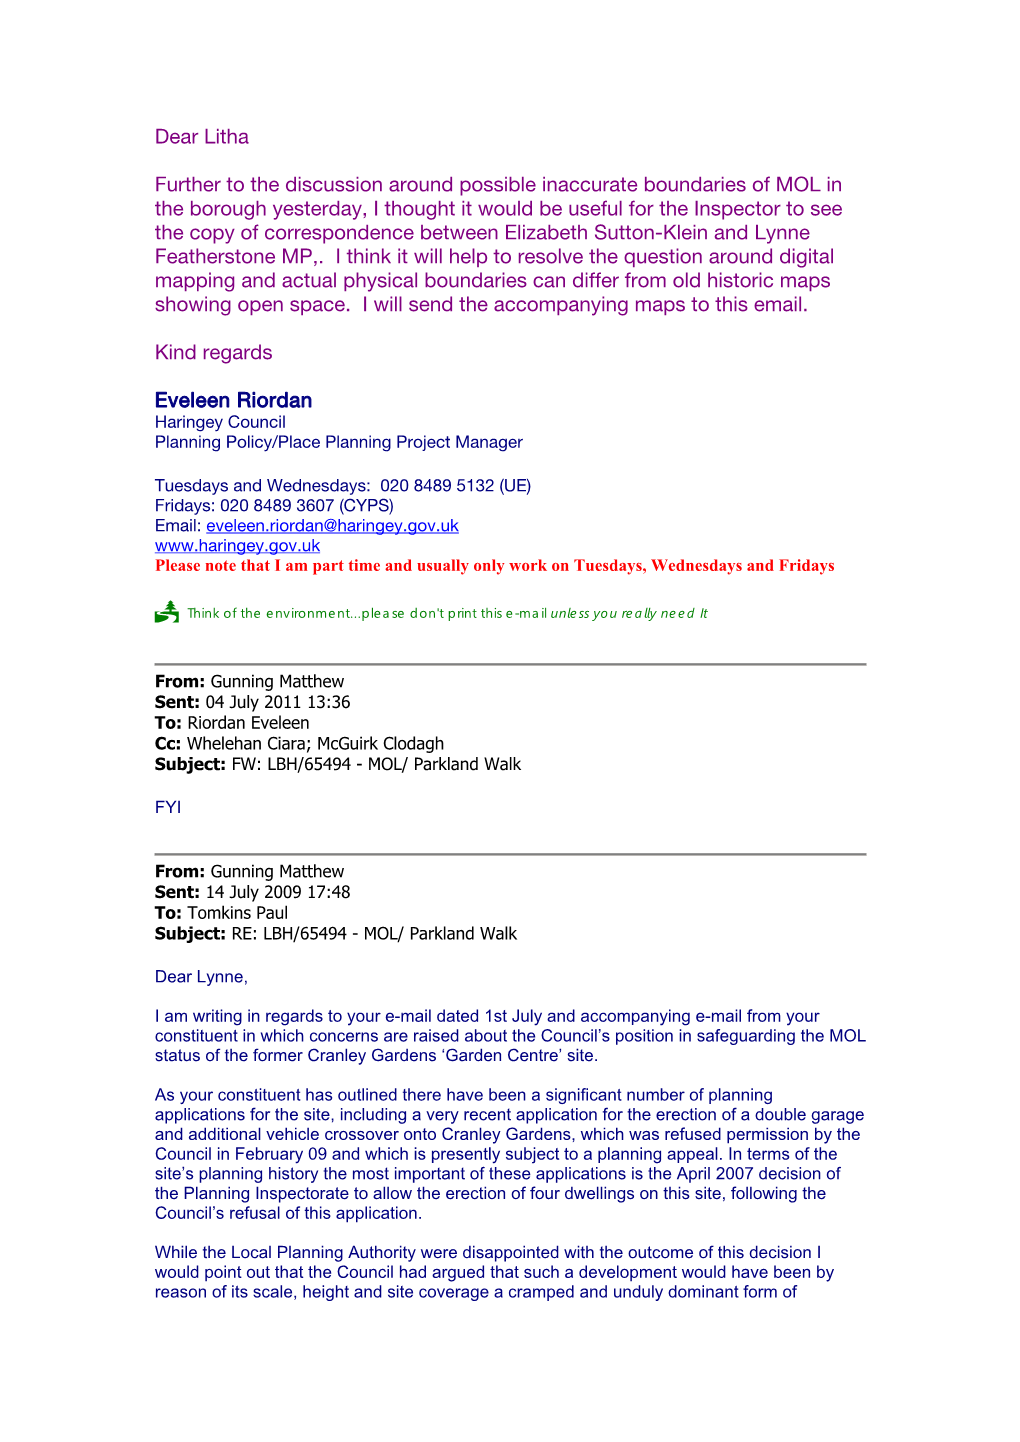 Email Between Lynne Featherstone and Elizabeth